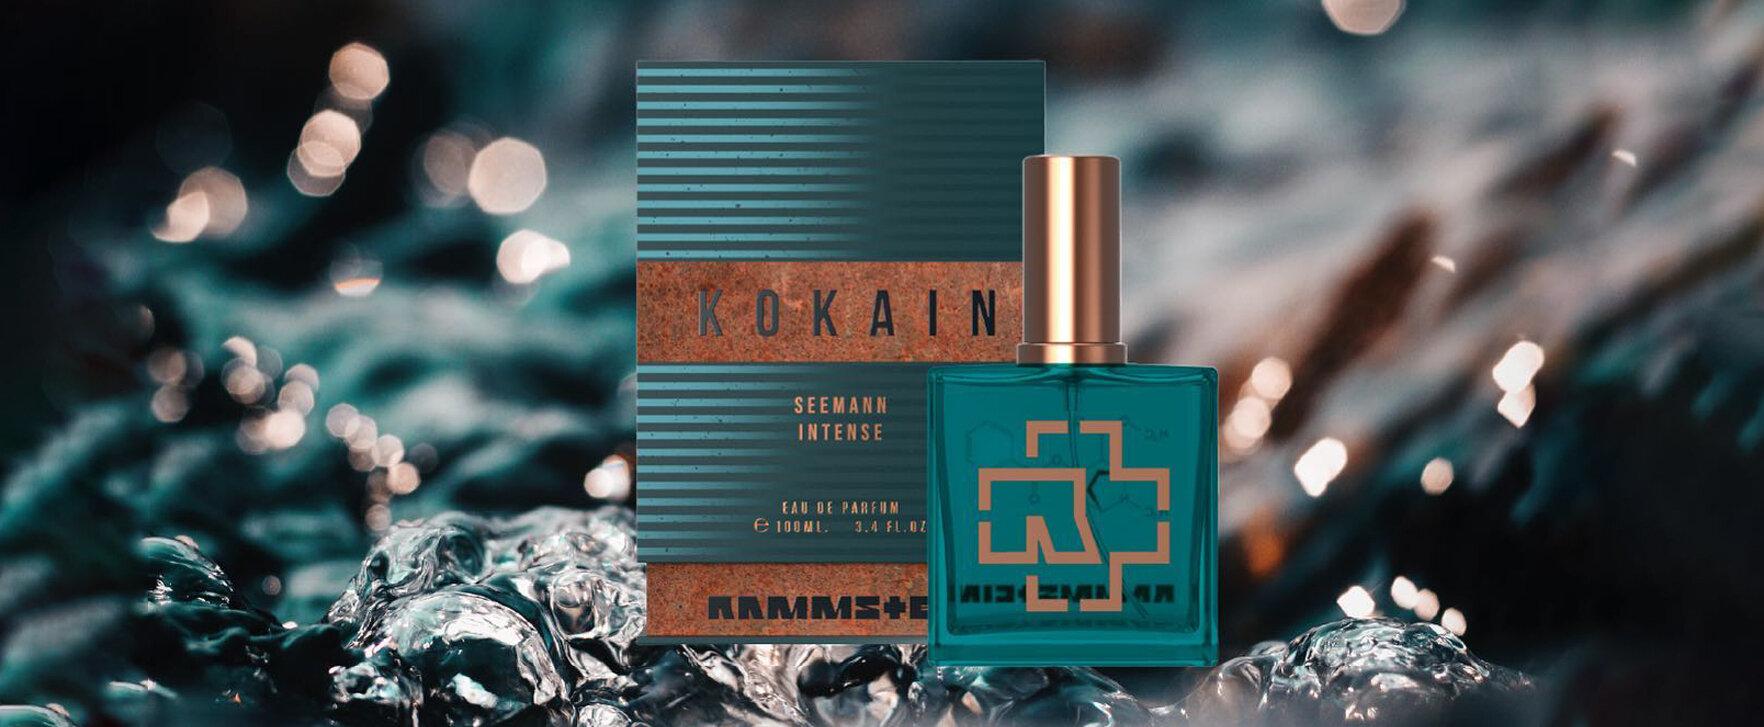 "Seemann Intense" - Rammstein Launches More Intense Version of the Fragrance